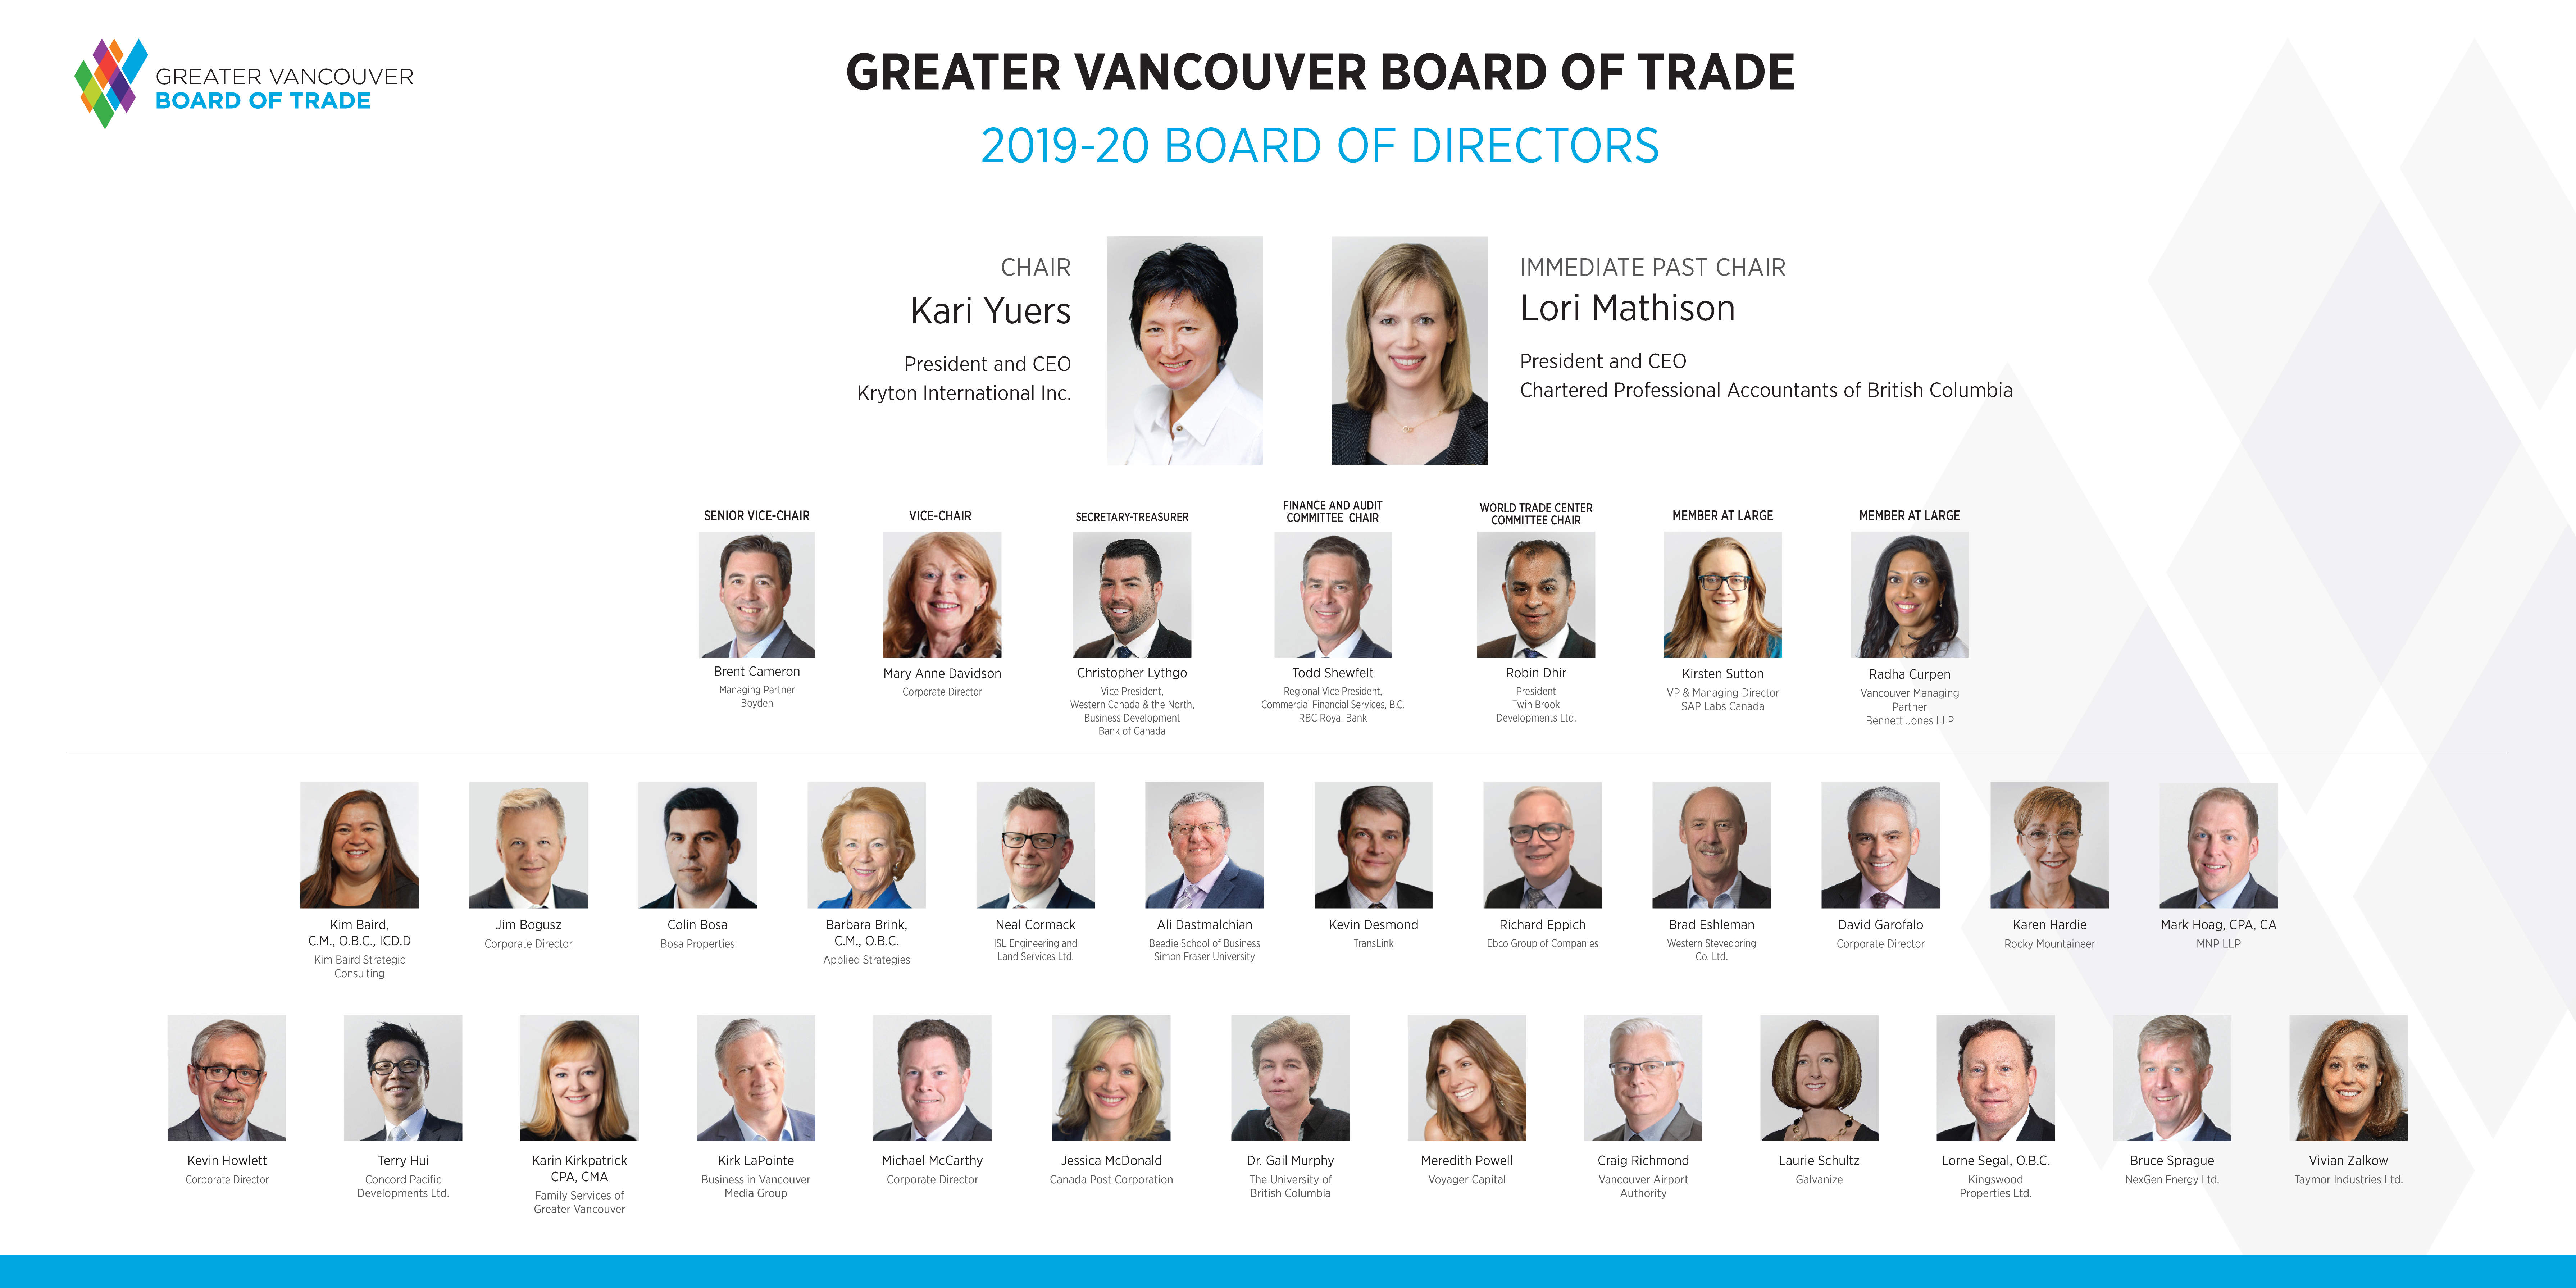 The Greater Vancouver Board of Trade appointed its 2019-20 board of directors today during its 132nd Annual General Meeting.